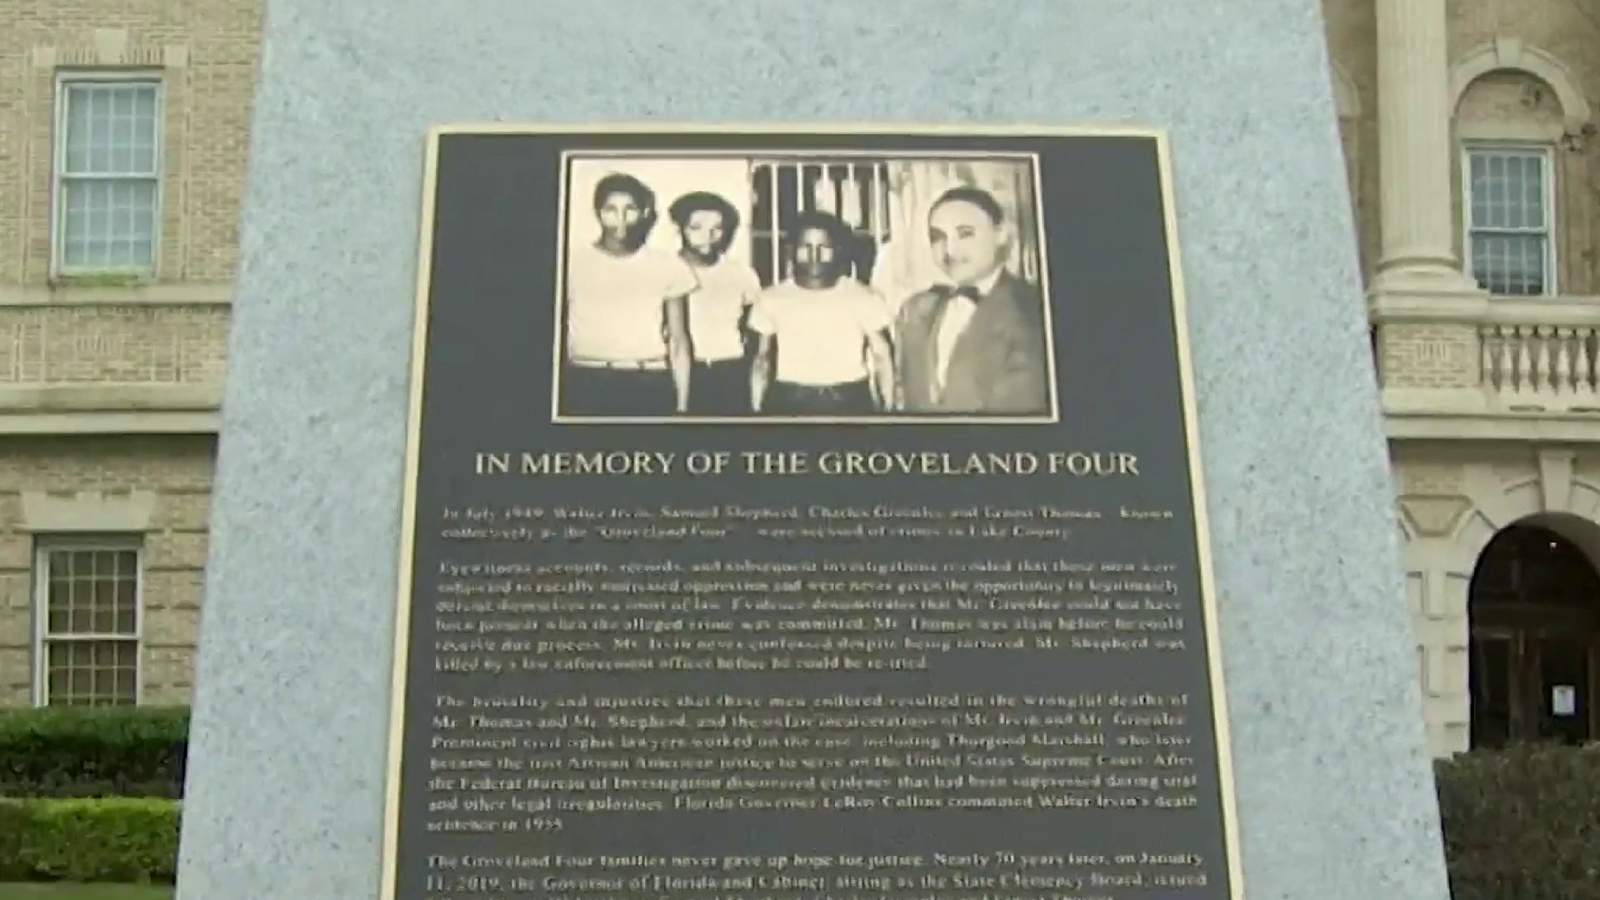 Groveland Four memorial unveiled in Lake County